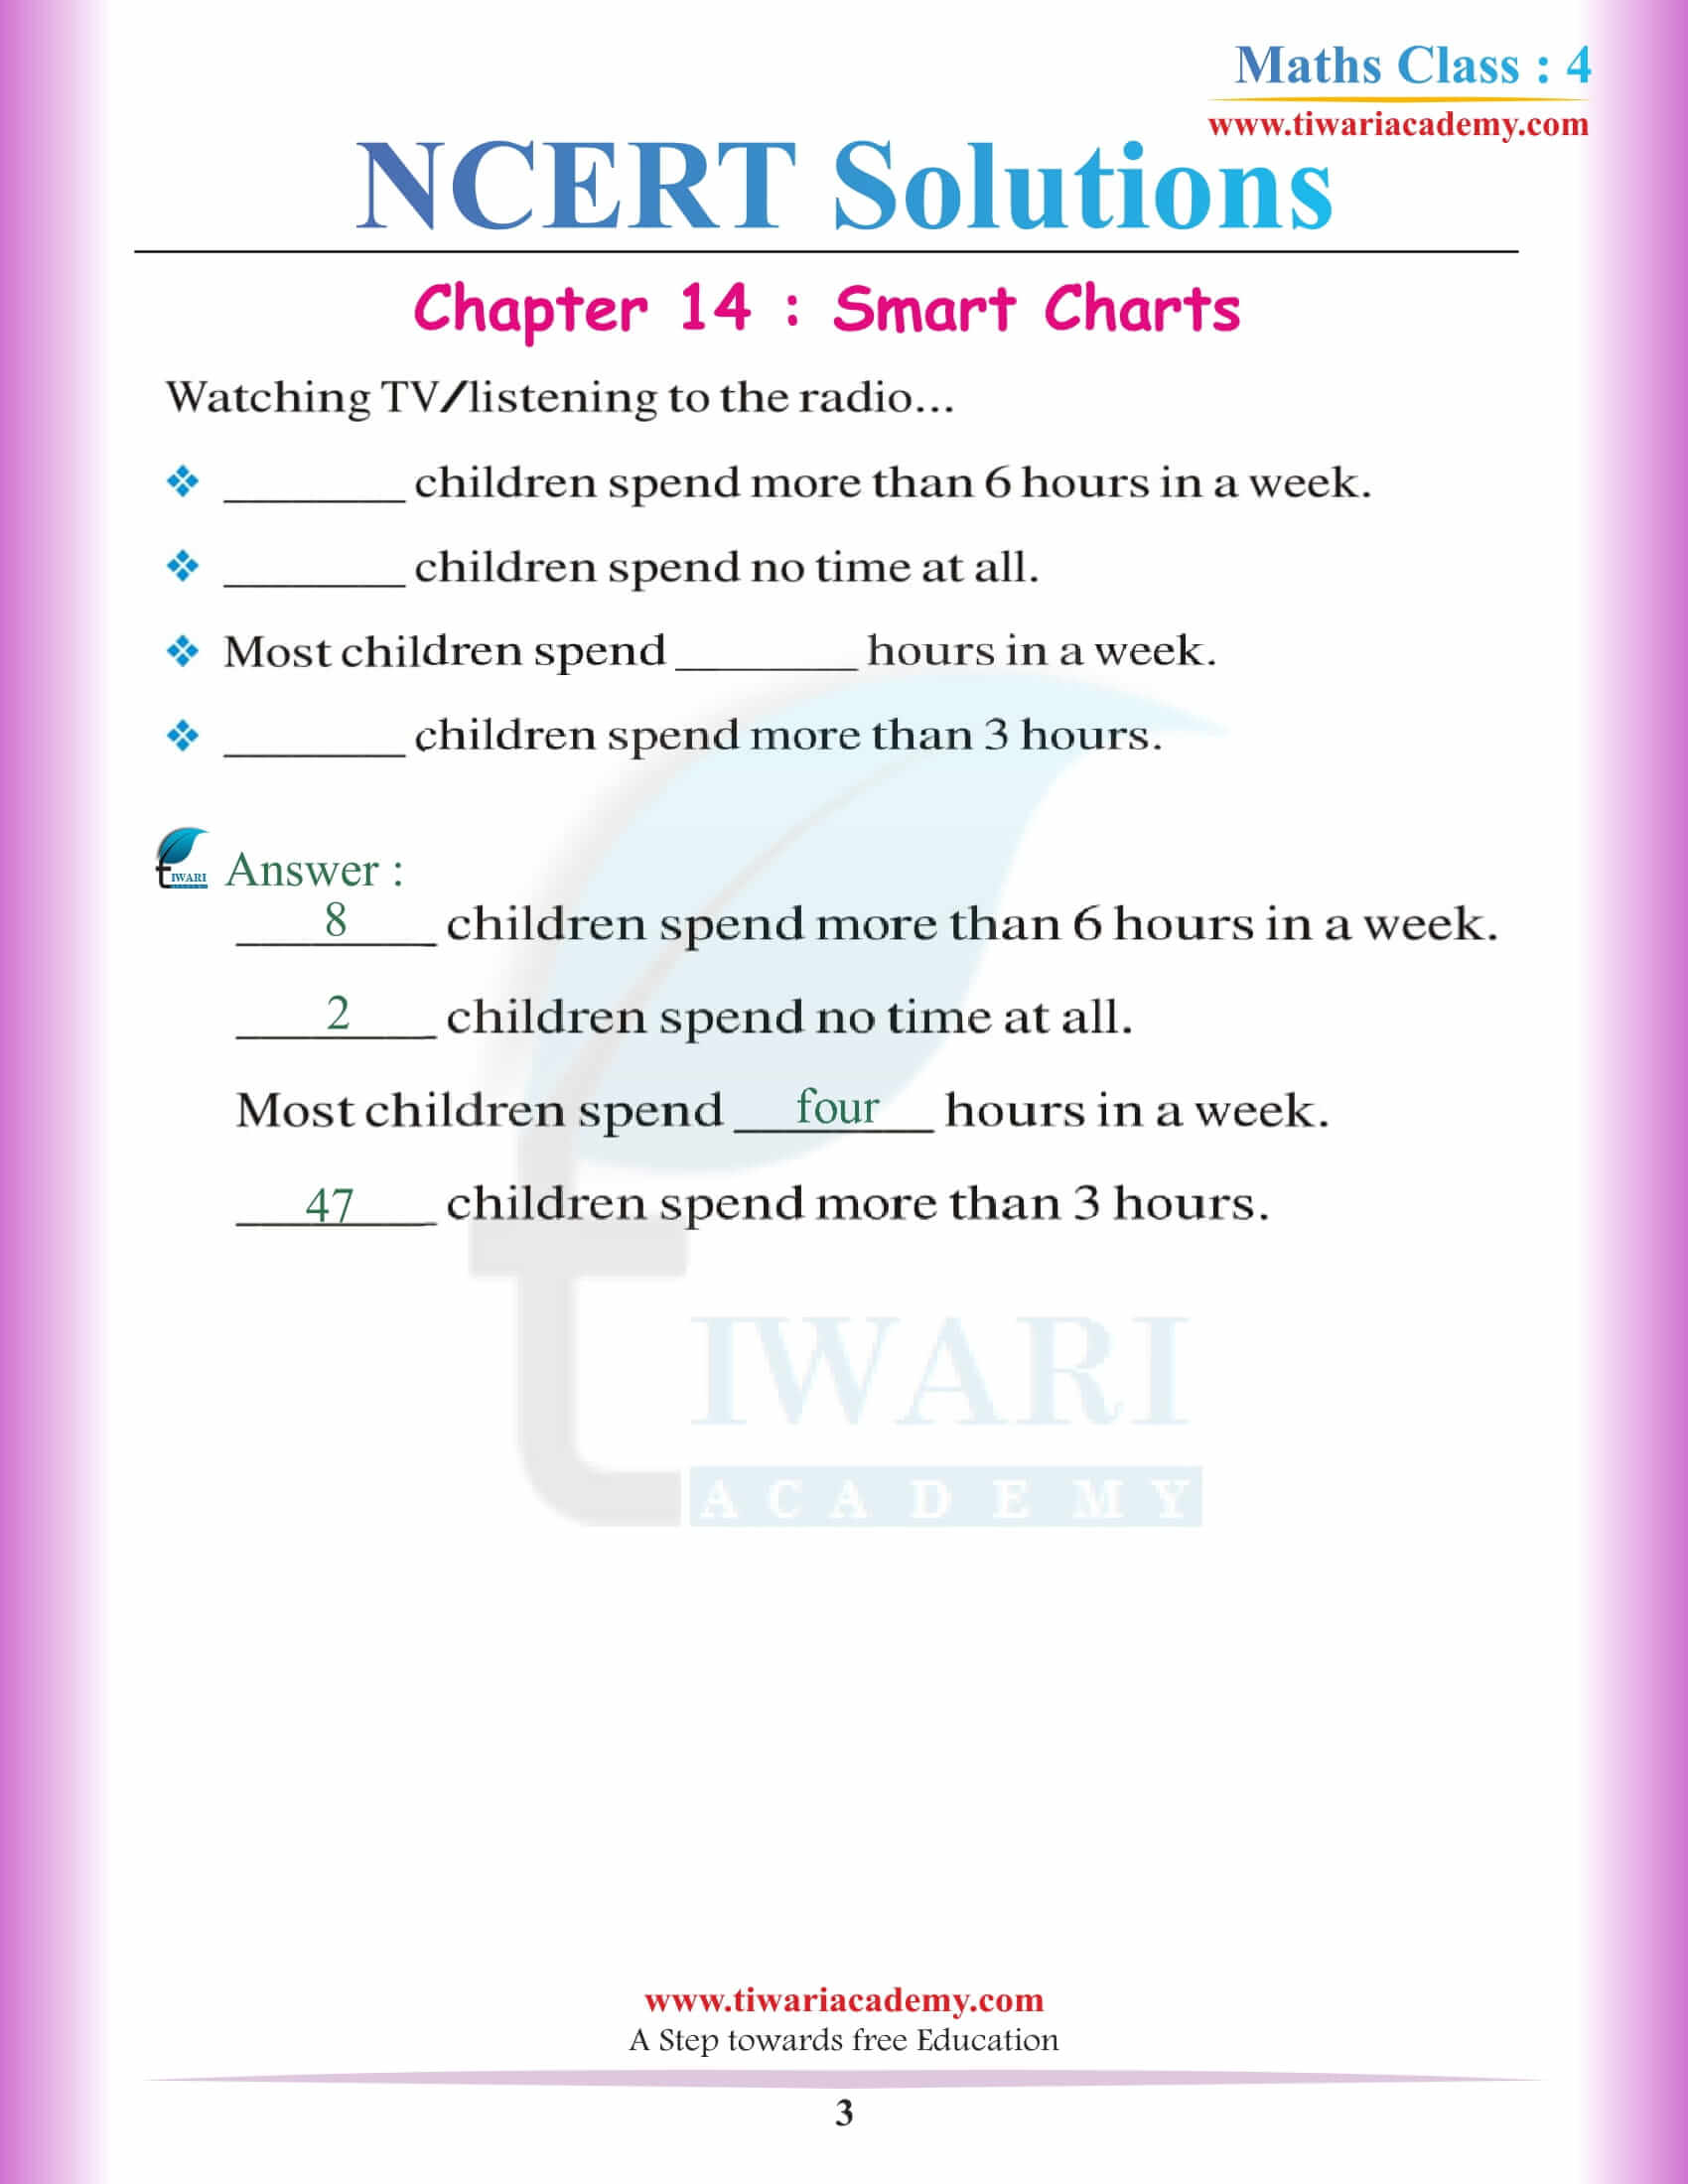 NCERT Solutions for Class 4 Maths Chapter 14 in PDF